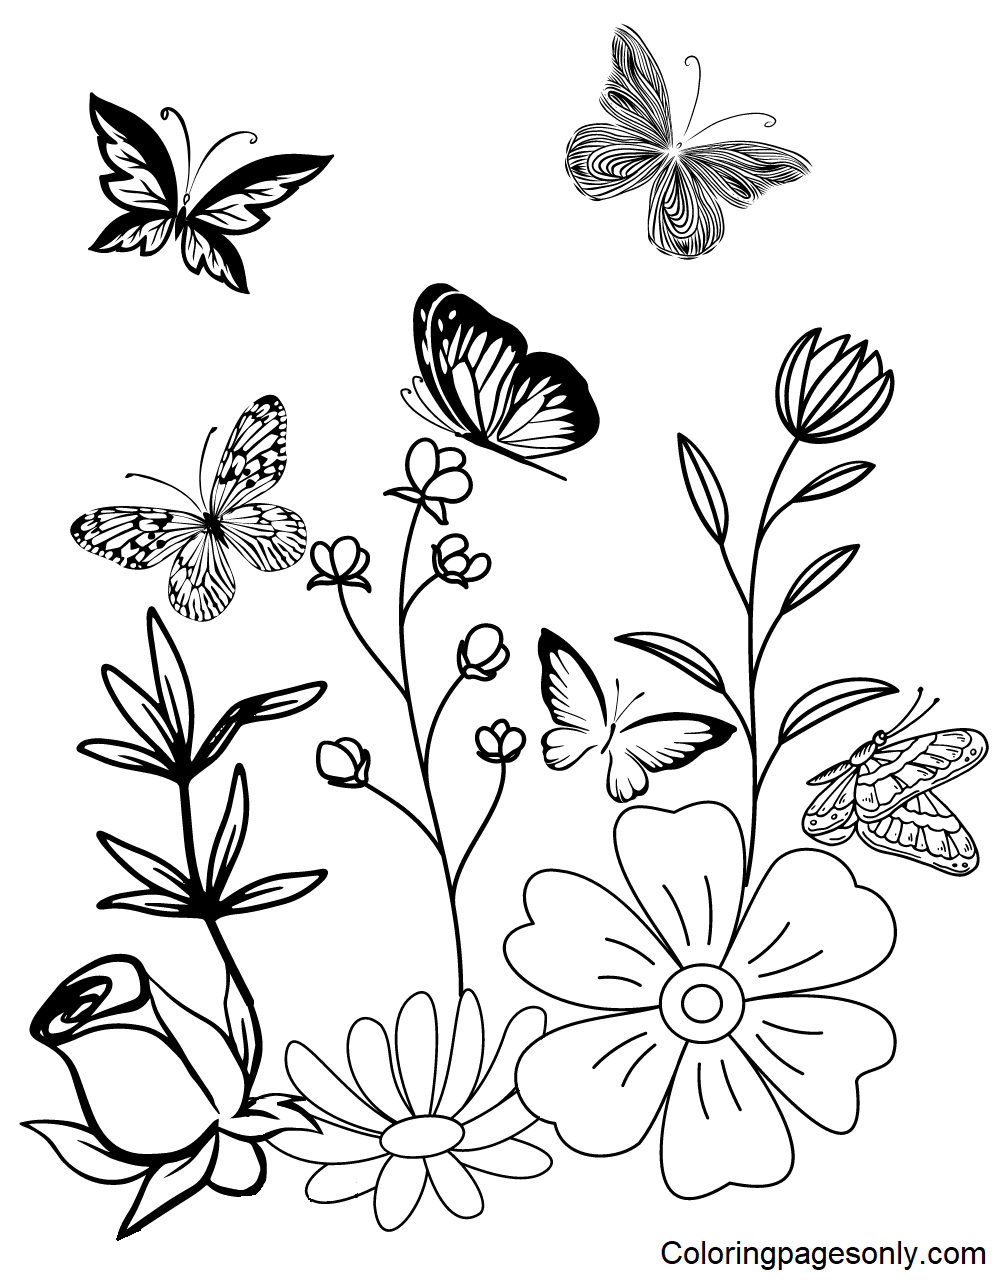 Spring Flowers to print Coloring Pages